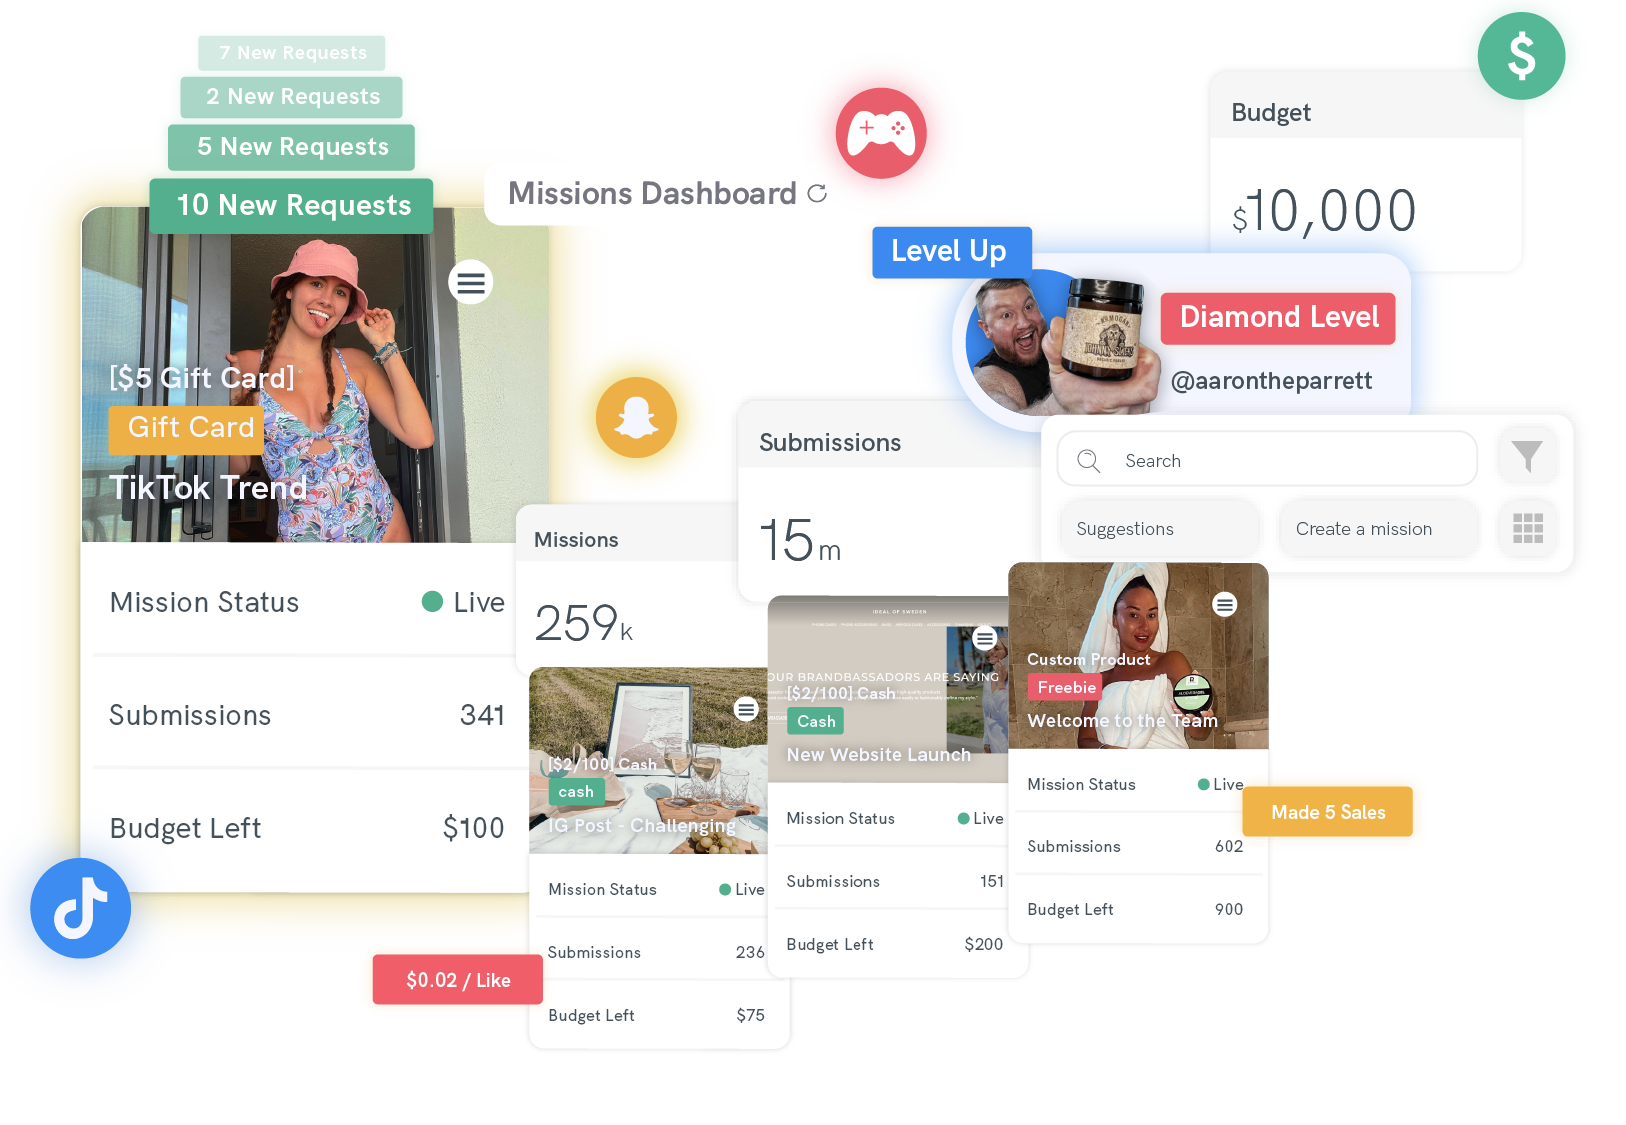 Create completely customised marketing tasks to promote engagement from your community of customers, followers and fans. Incentivise sales and interaction with cash, points, gift cards, or freebie rewards. Increase revenue with sales-driven tasks.